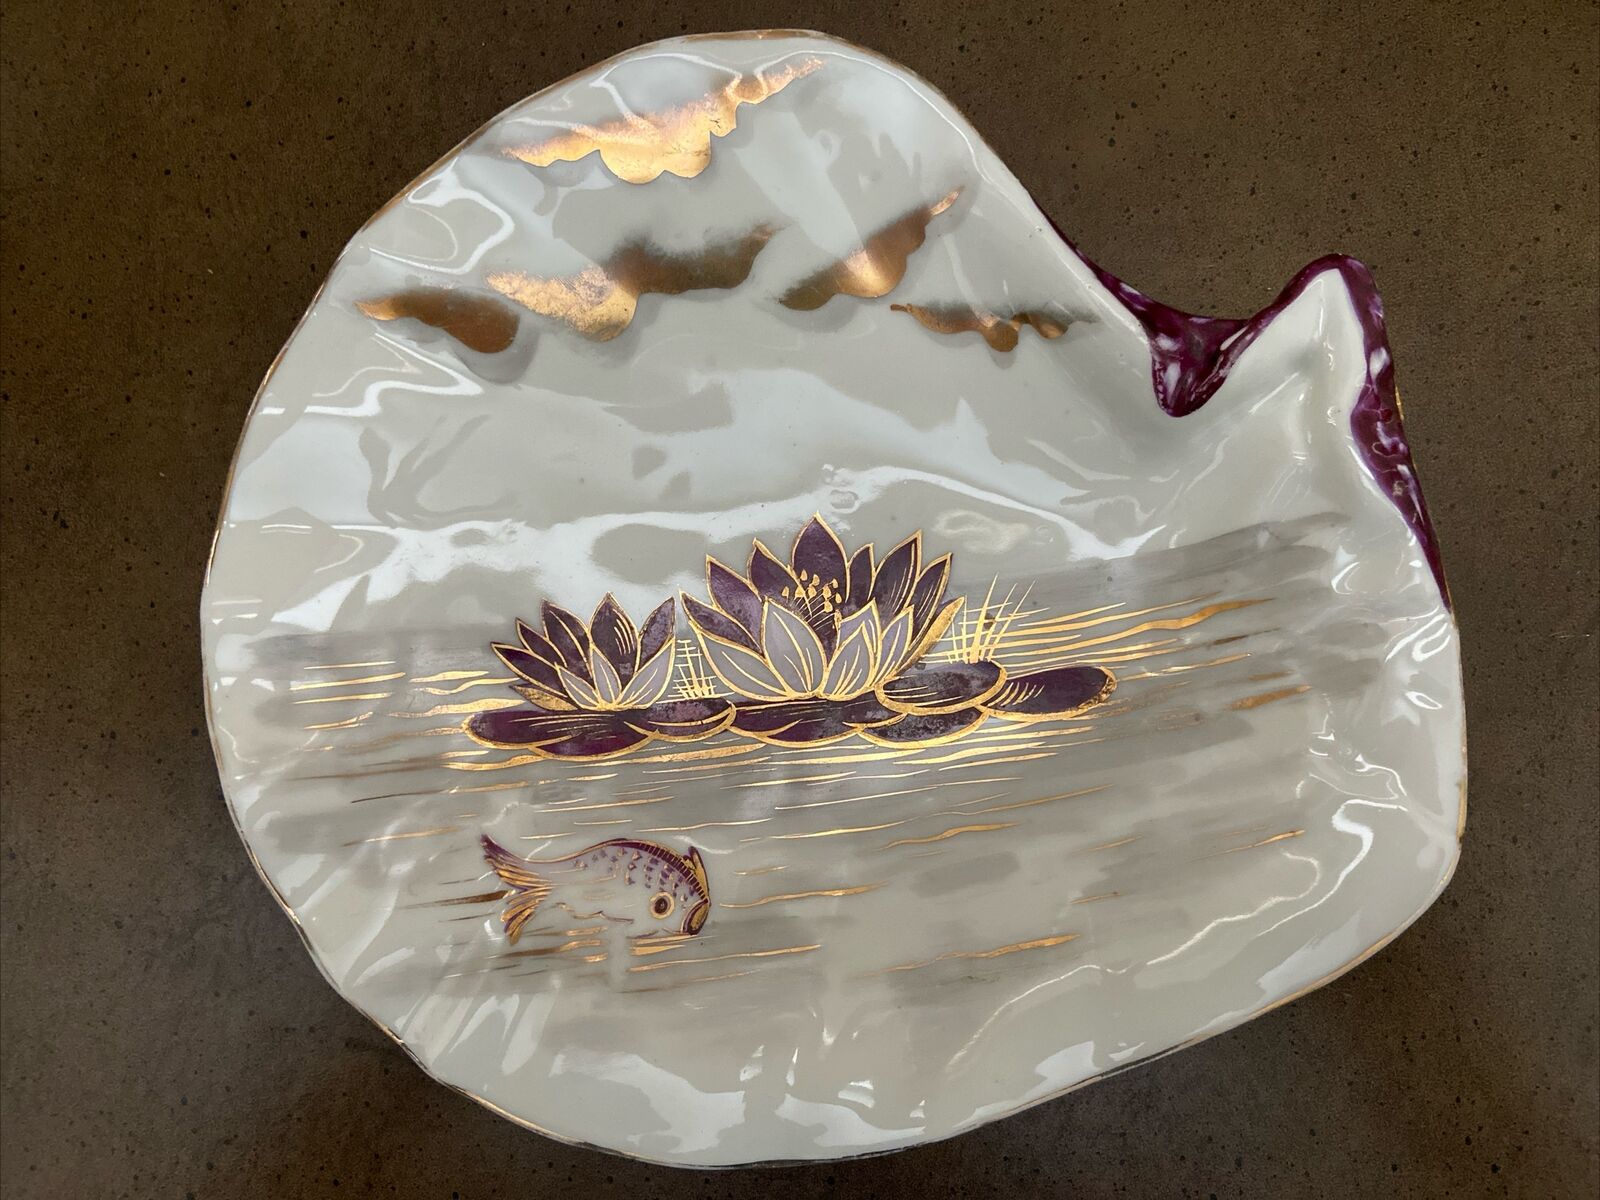 Antique WEIMAR German Porcelain Seafood Plate Oyster Shaped Japanese Koi Fish